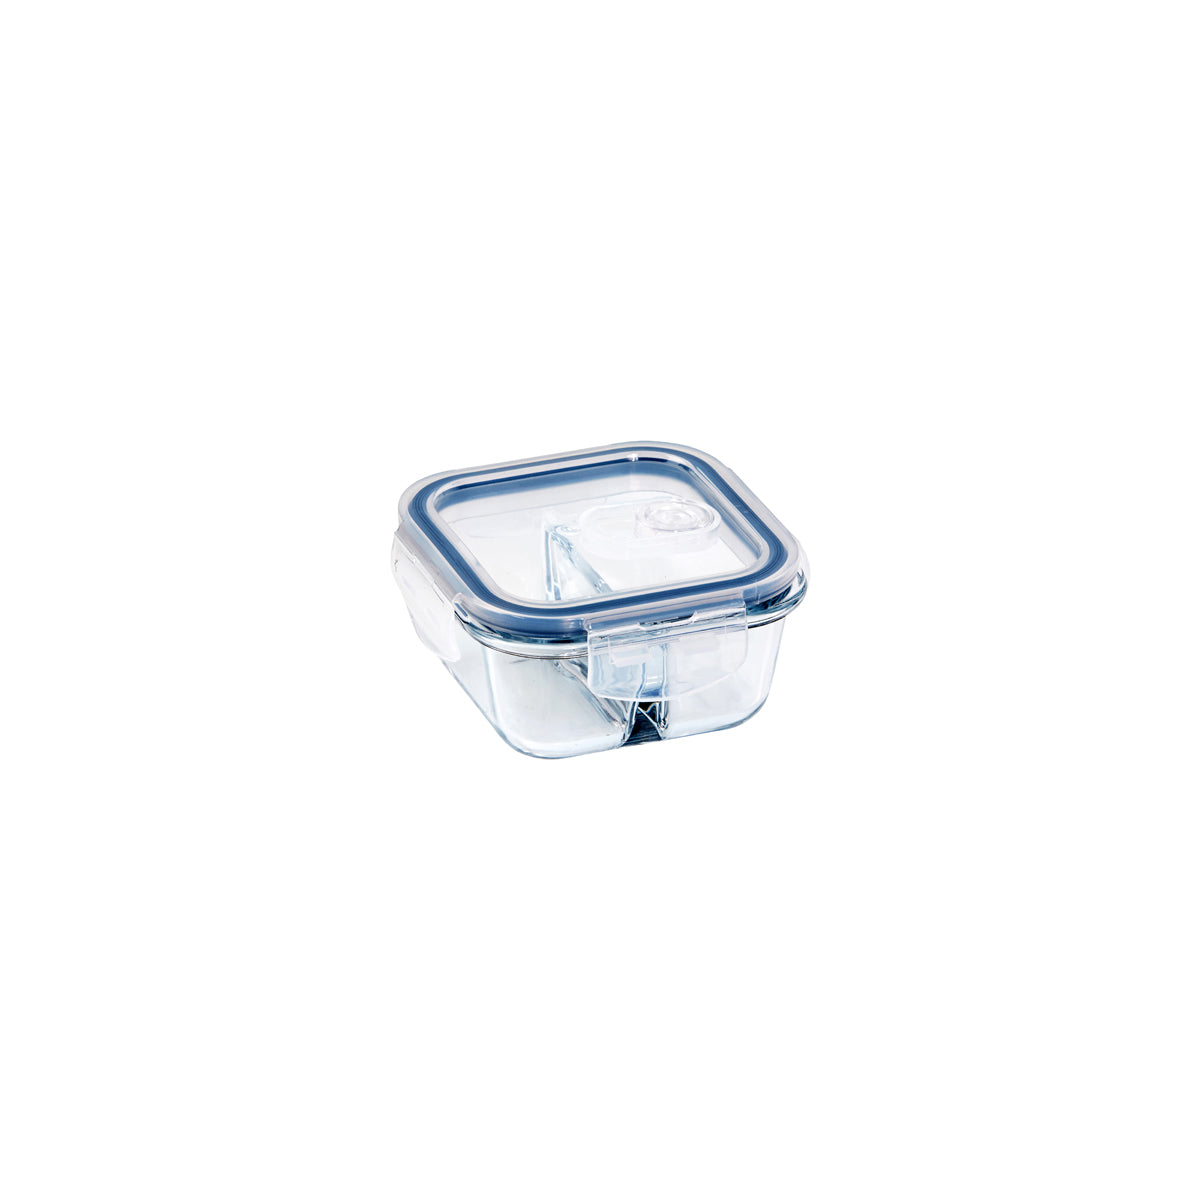 ETR48146 Eterna Glass Containers 2 Divider Square 300ml Tomkin Australia Hospitality Supplies